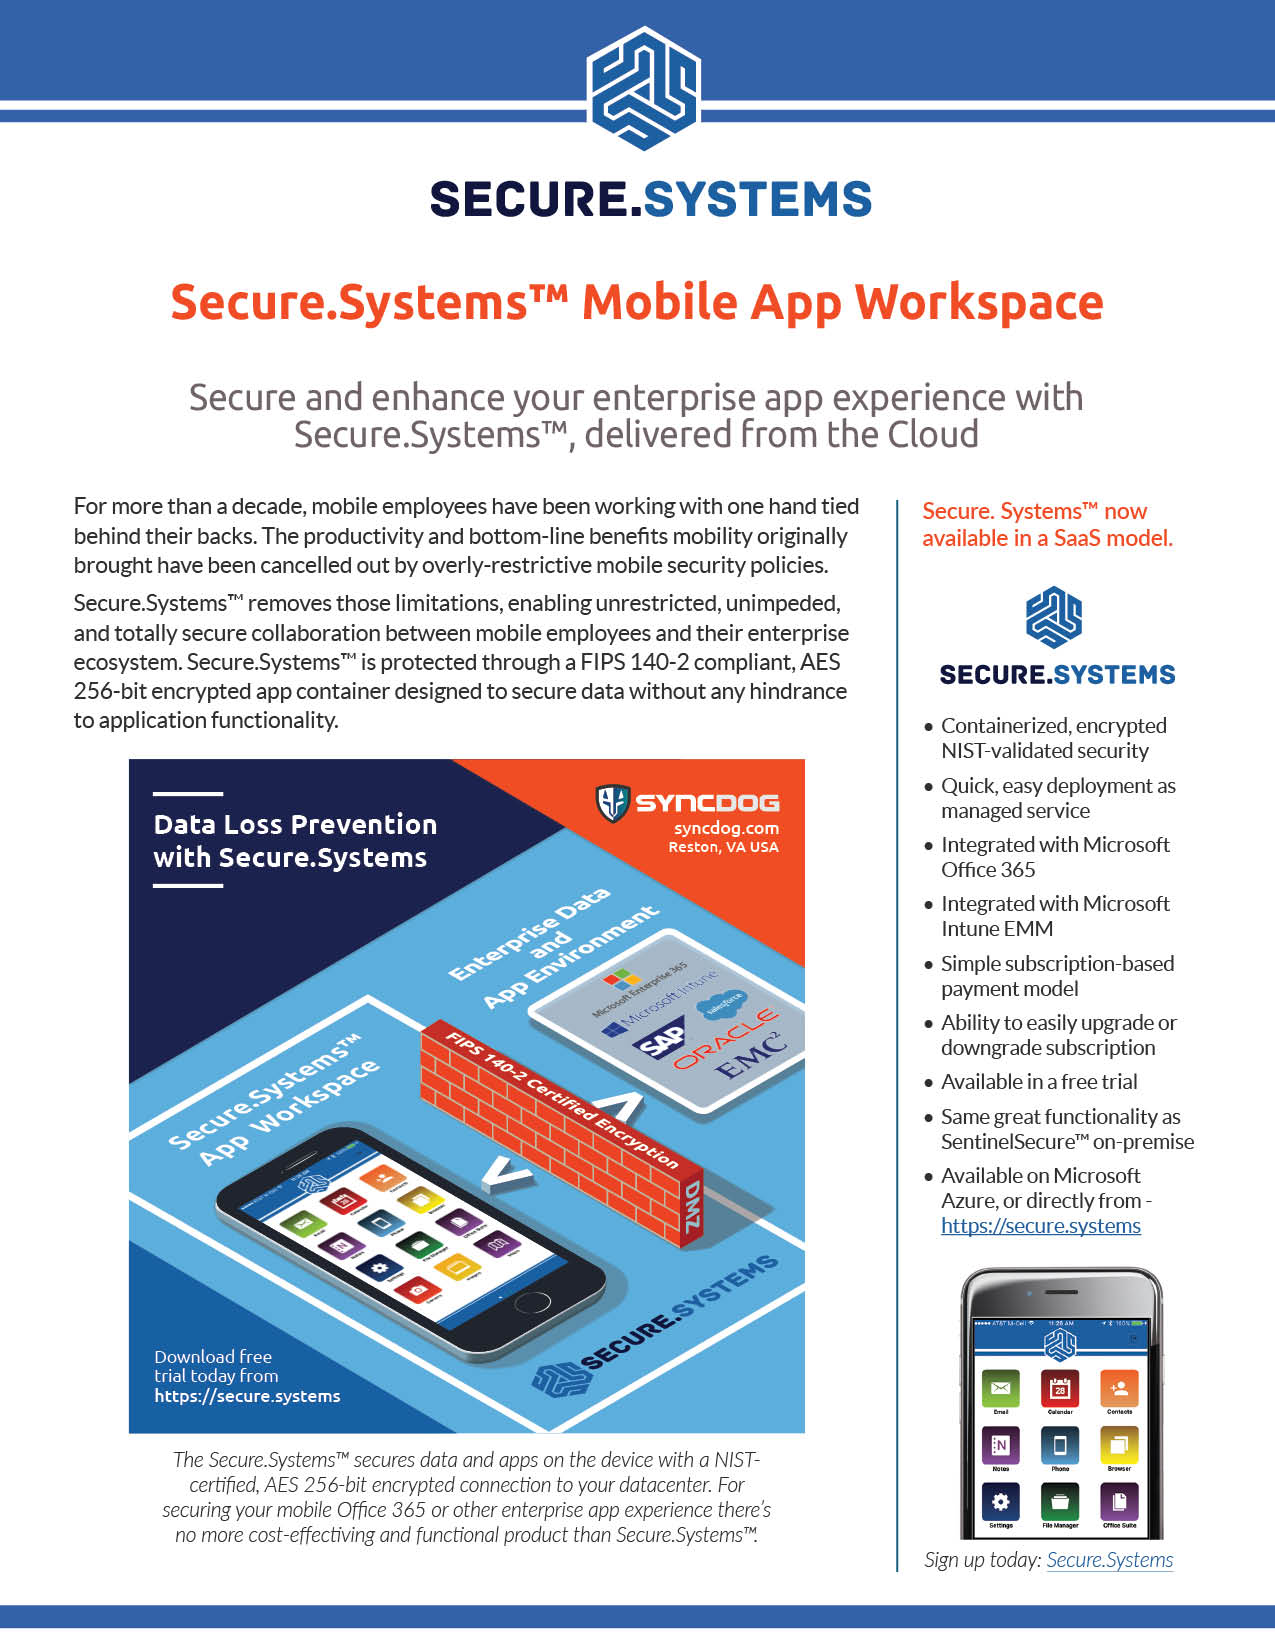 Secure.System Mobile App Work space